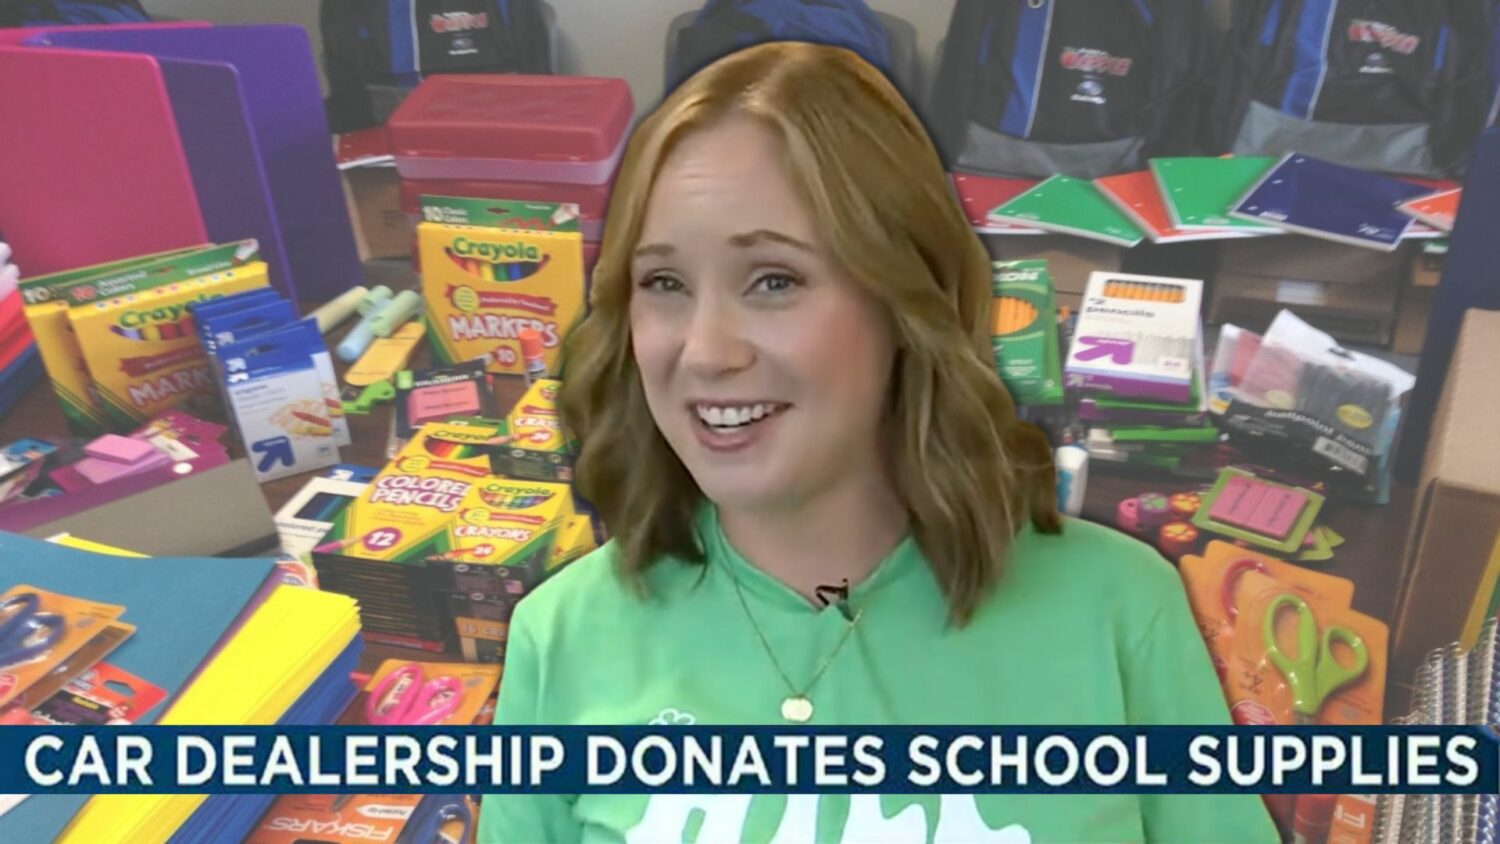 A Lincoln car dealership provided school supplies to 40 teachers in Lancaster County, Pennsylvania.